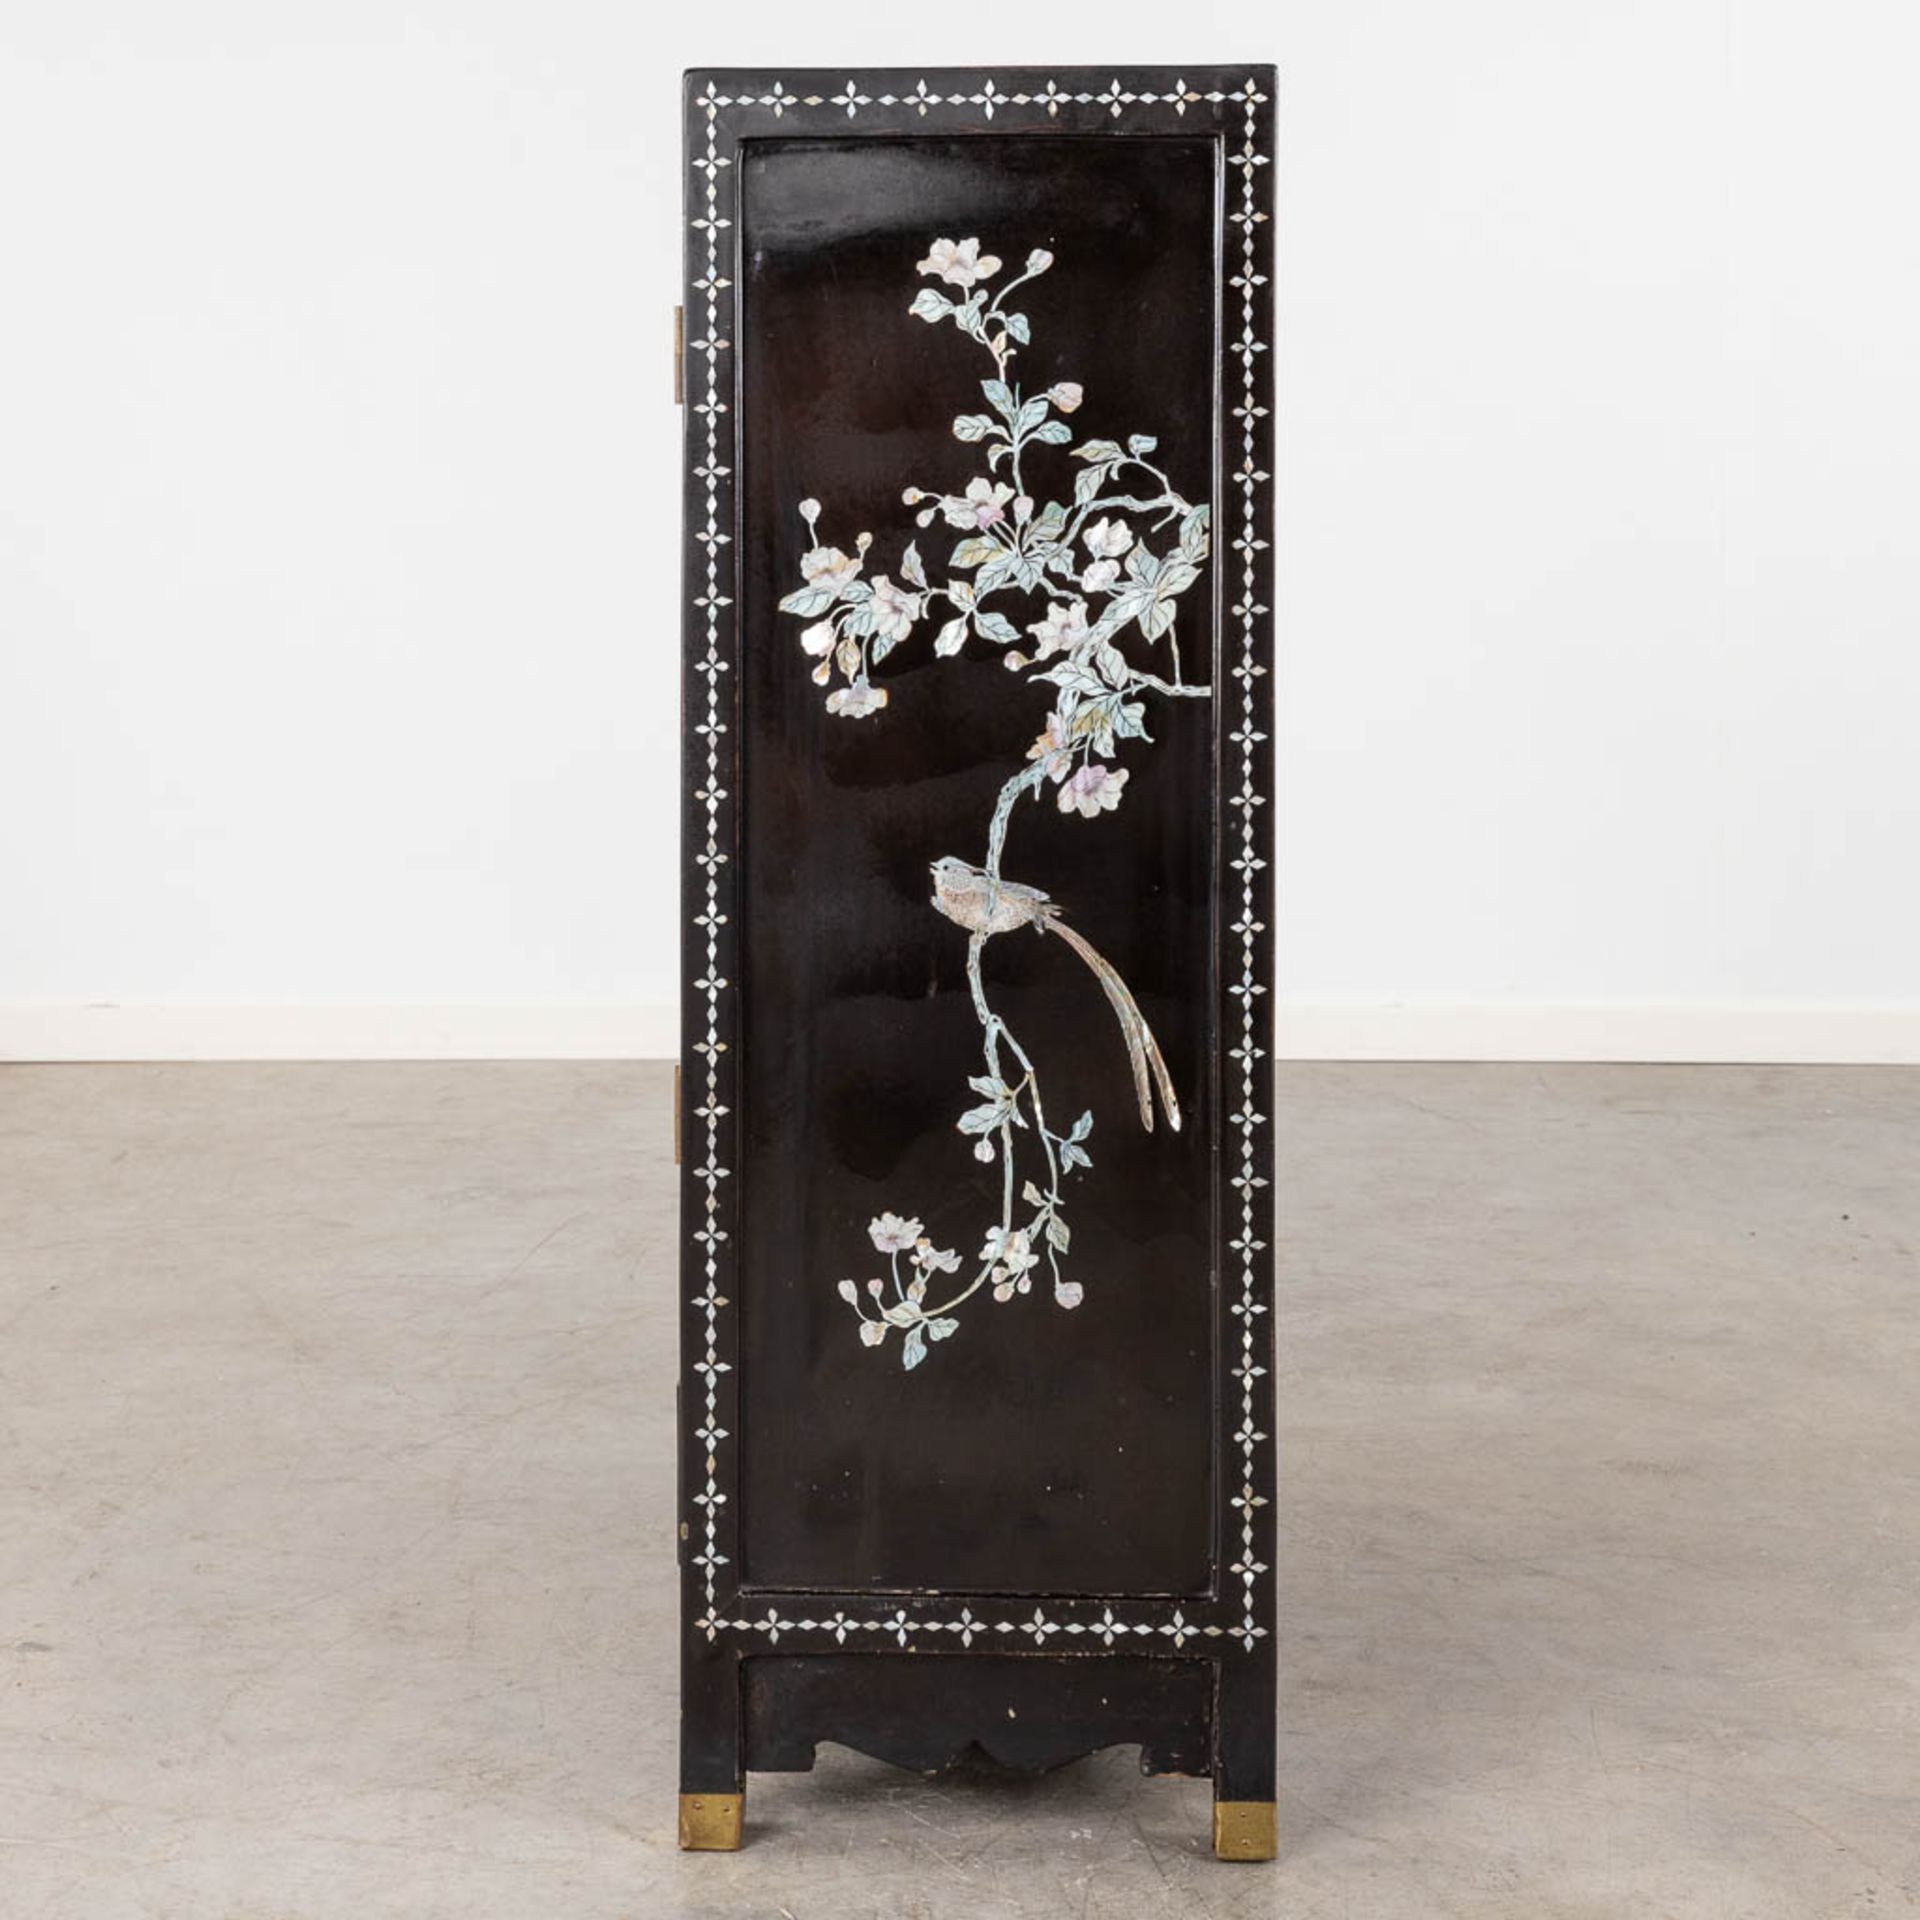 A Chinoiserie cabinet, mother of pearl inlay in ebonised wood. 20th C. (D:31 x W:61 x H:92 cm) - Image 8 of 14